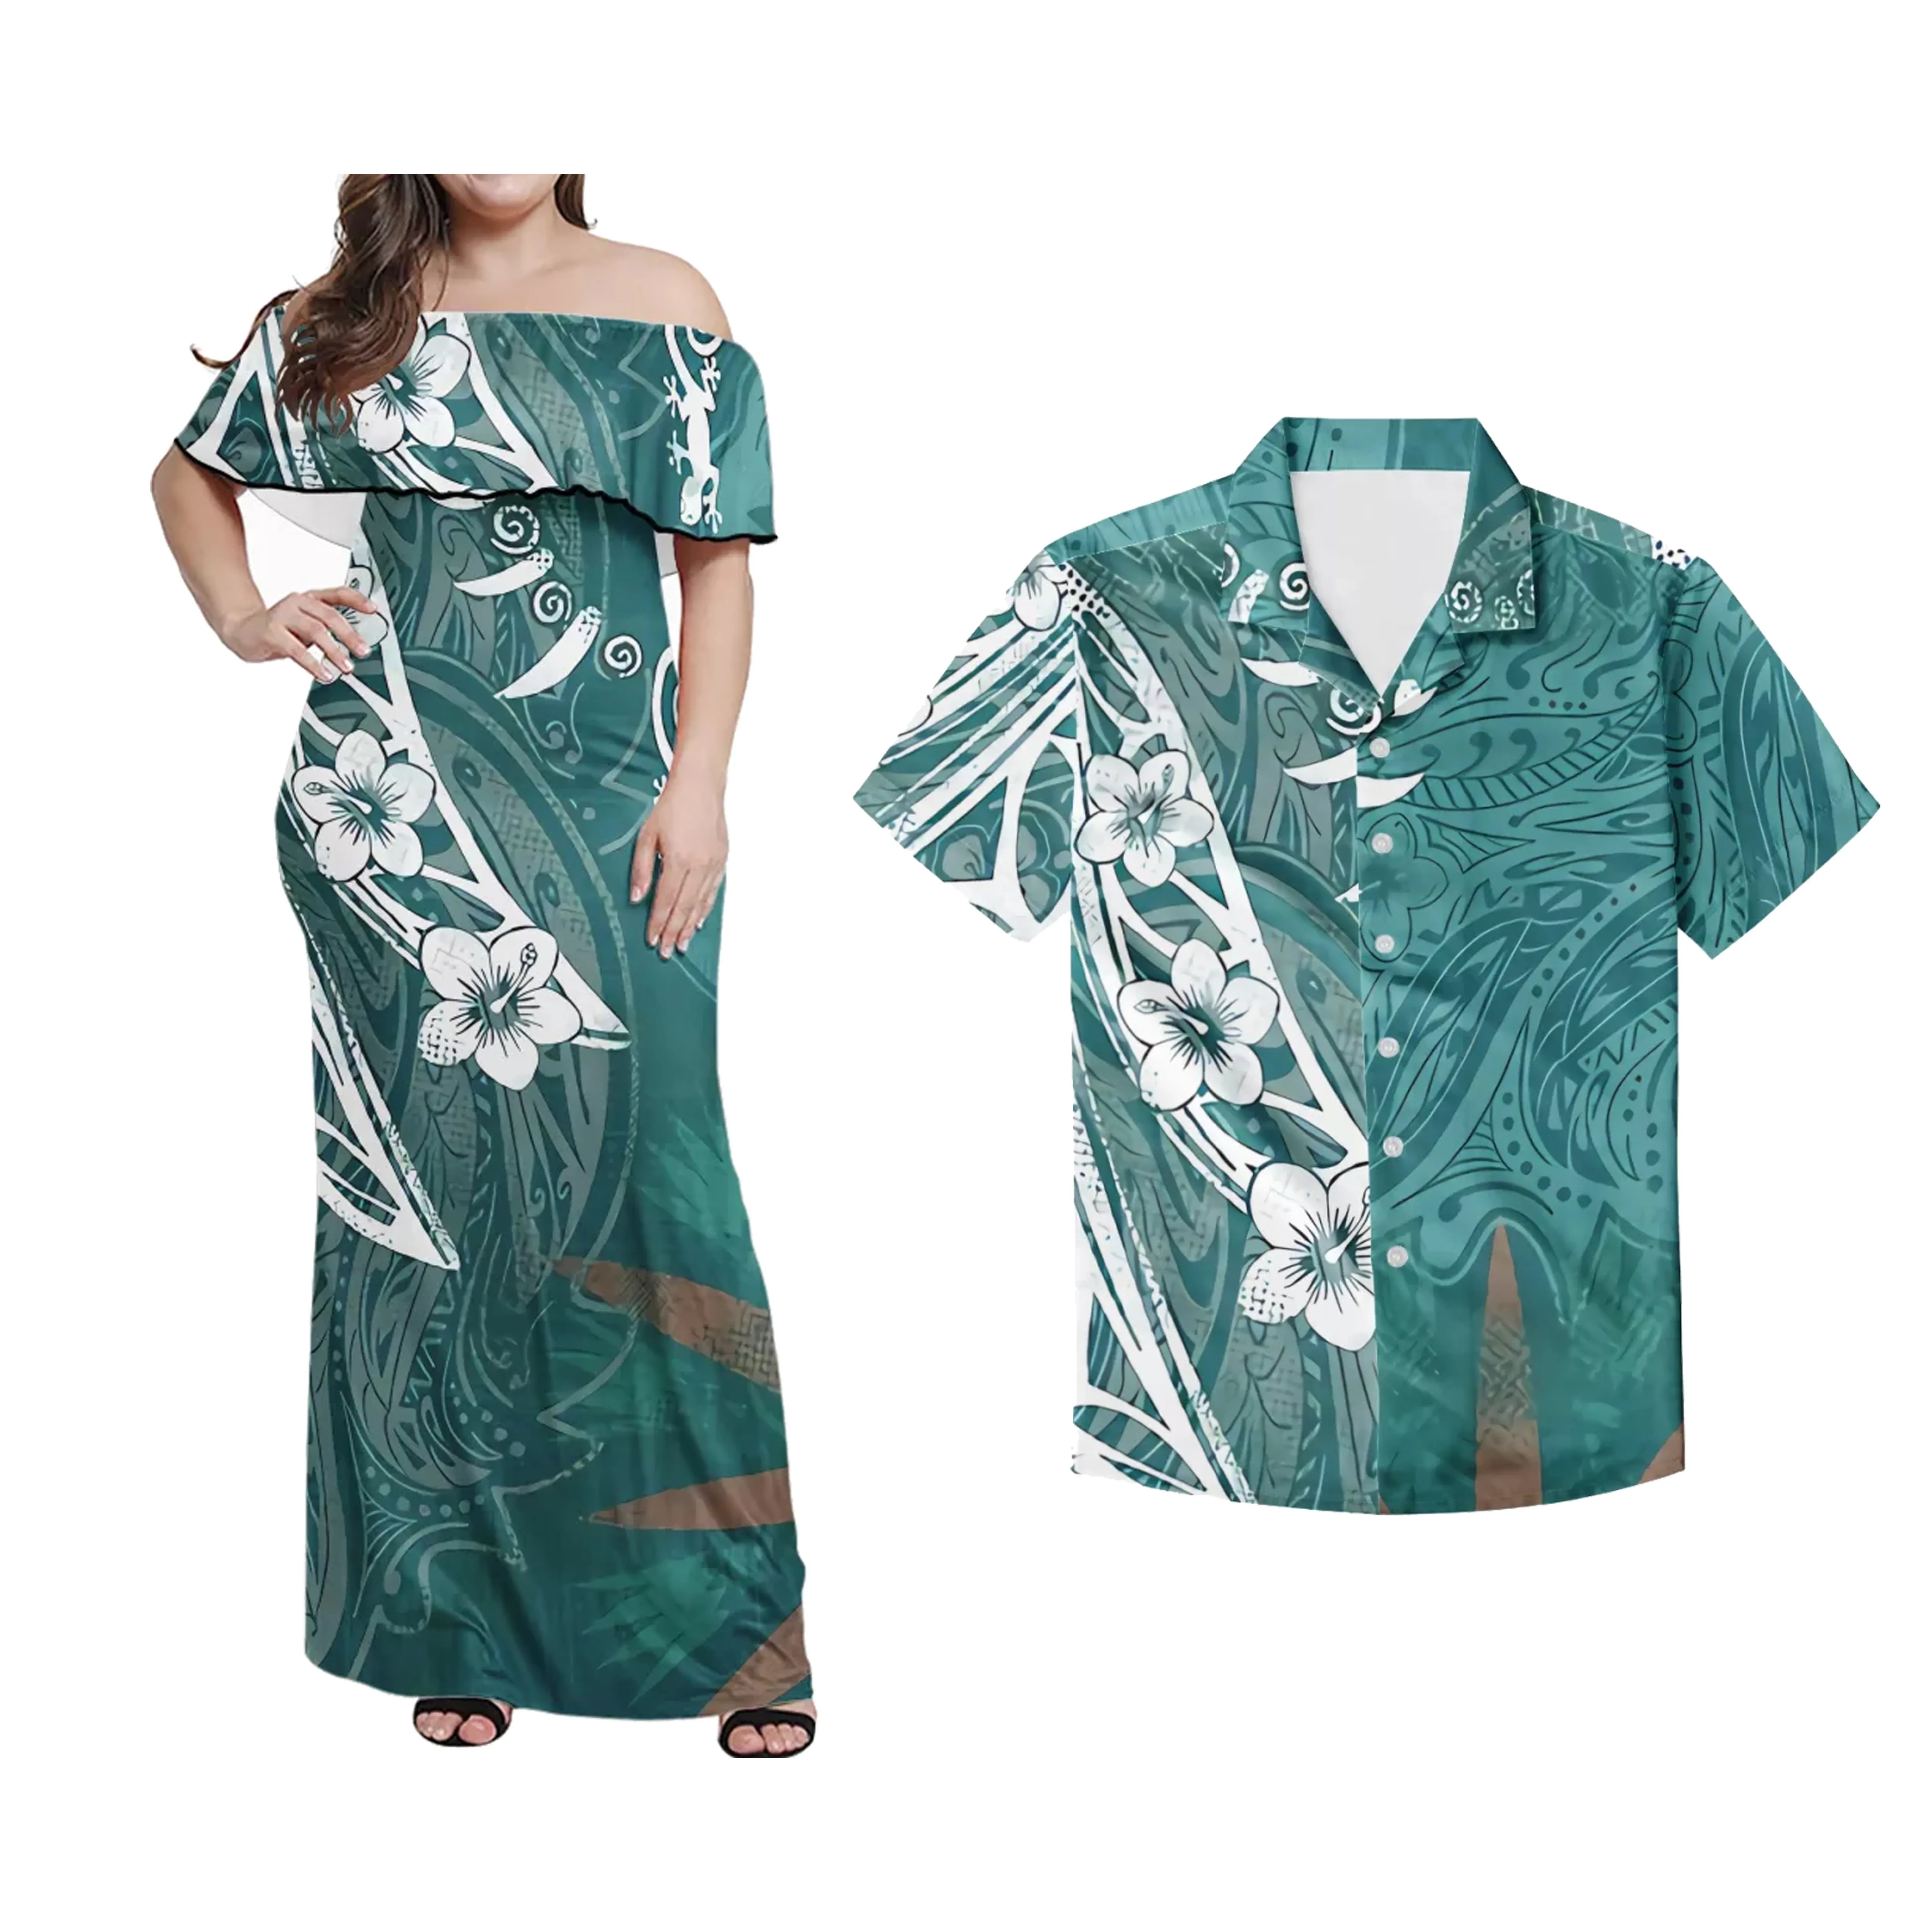 Turquoise SIA Plumeria Pattern Clothing Custom Polynesian Tribal Design Puletasi Clothes Sets Casual Couples Dress and Shirts